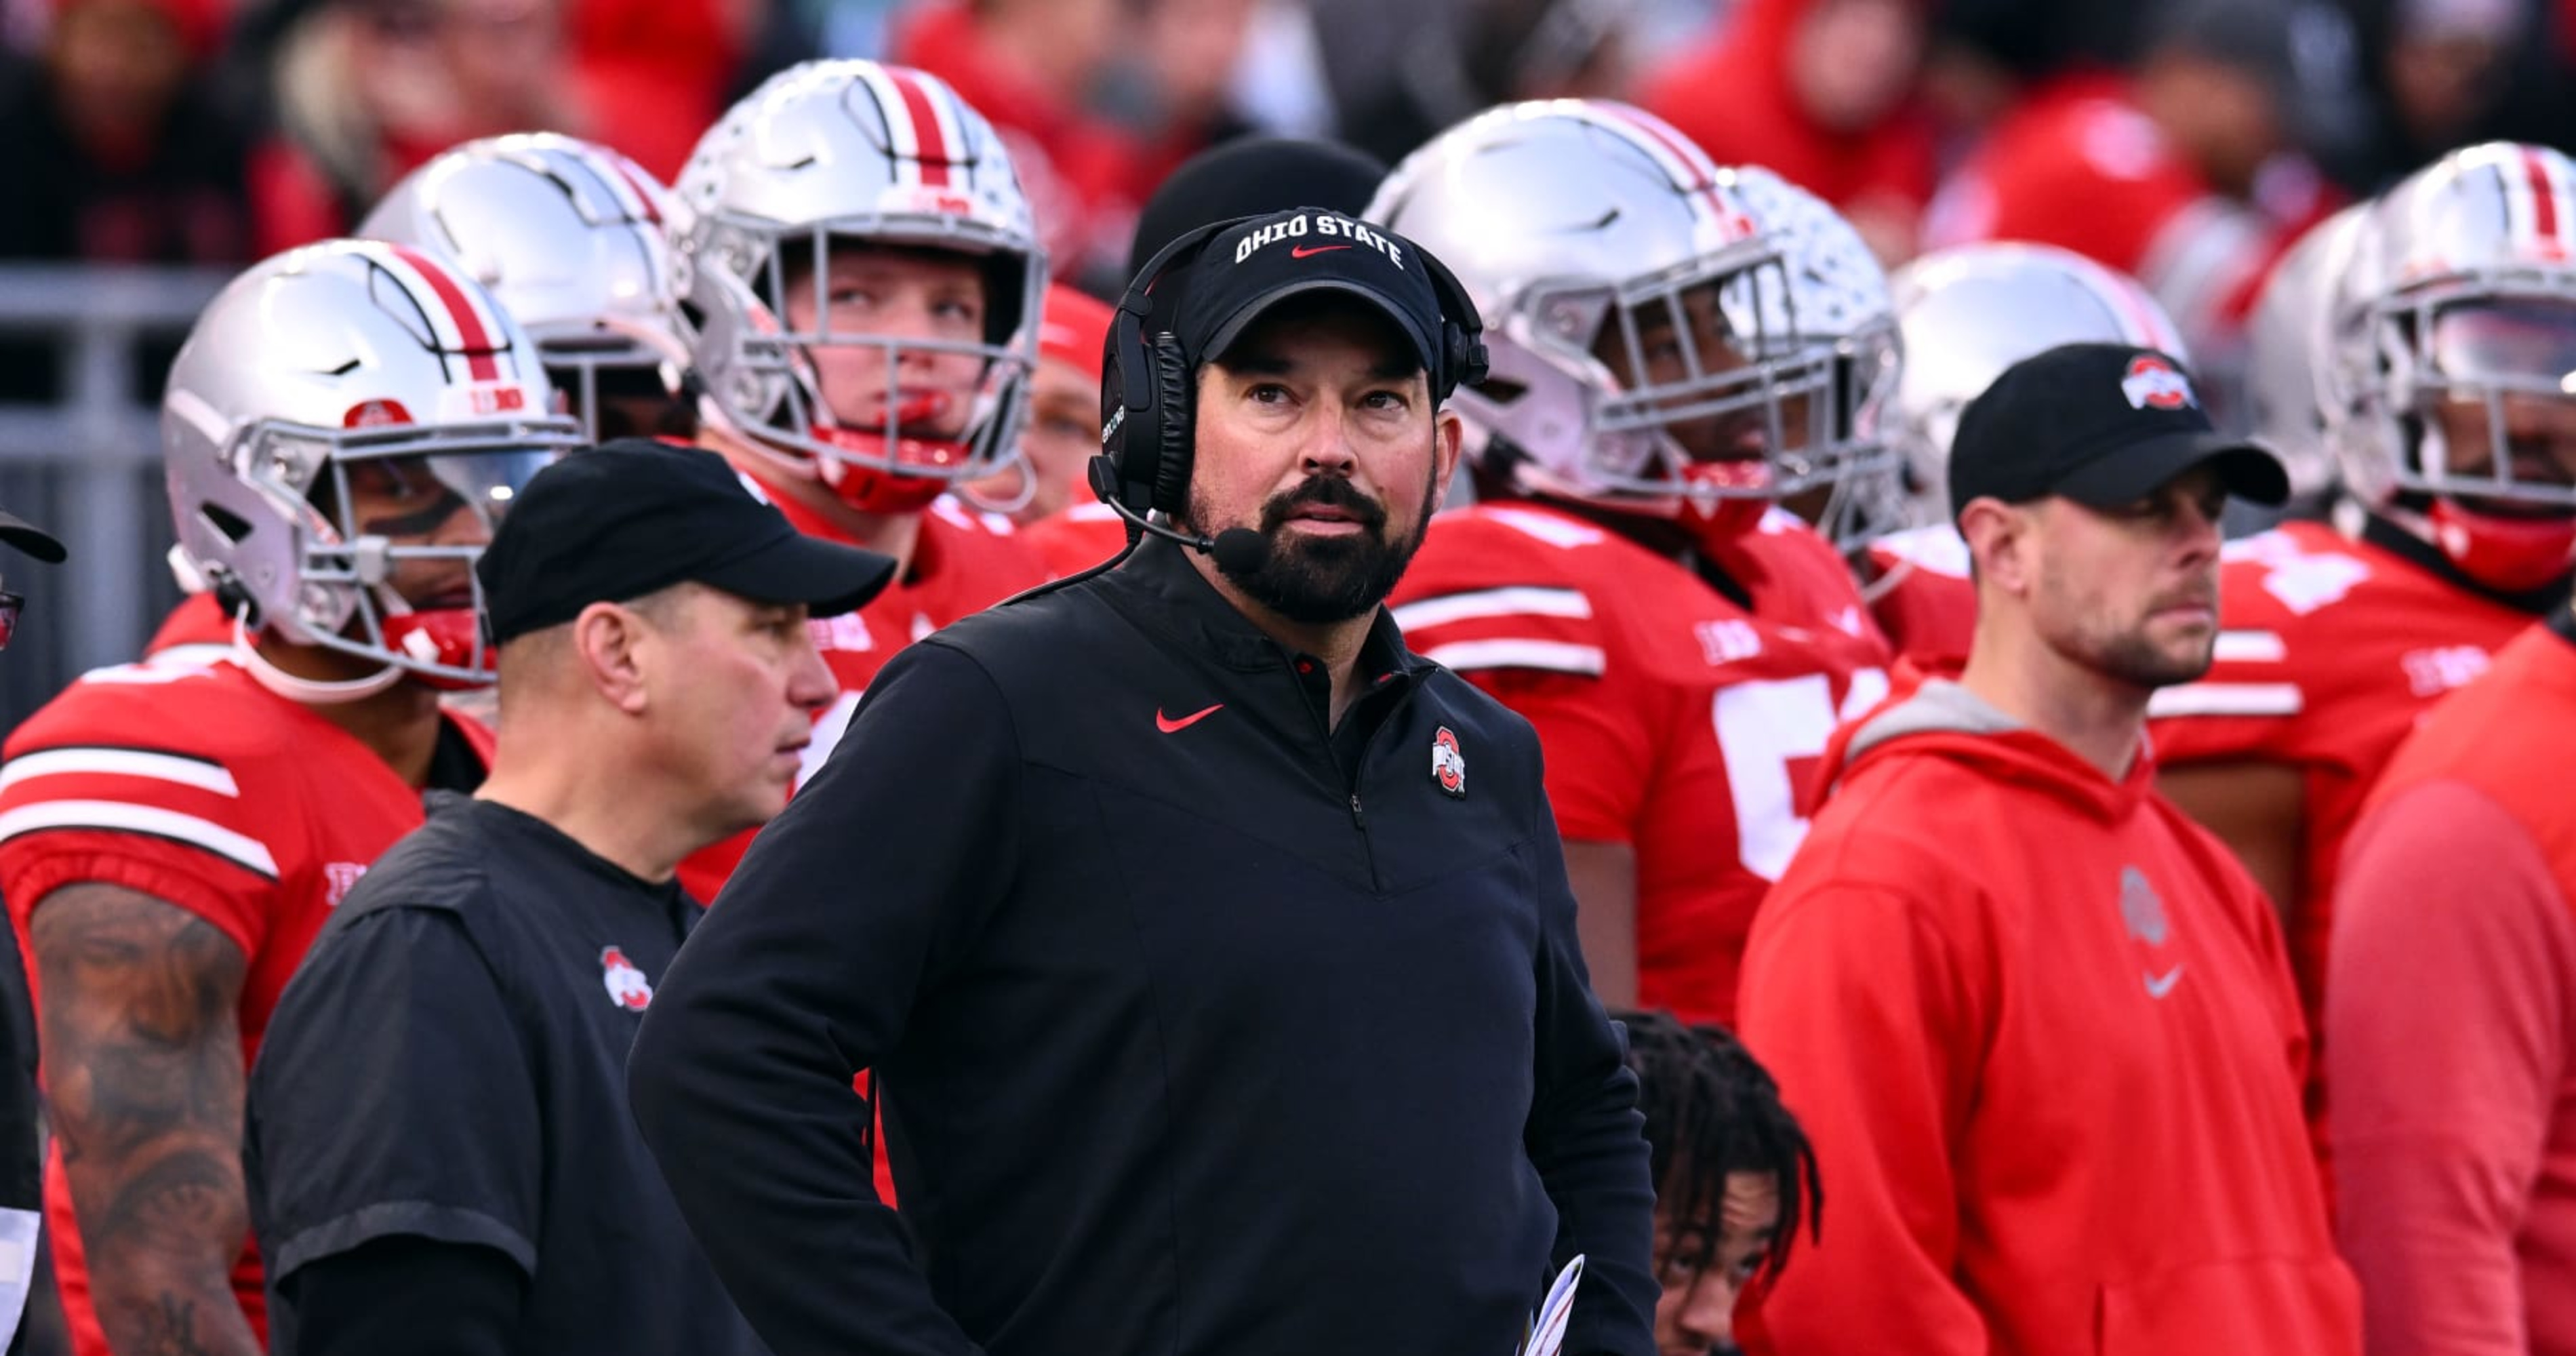 Ohio State 'Without a Doubt' Deserves CFP Bid After Michigan Loss, Kevin Warren ..